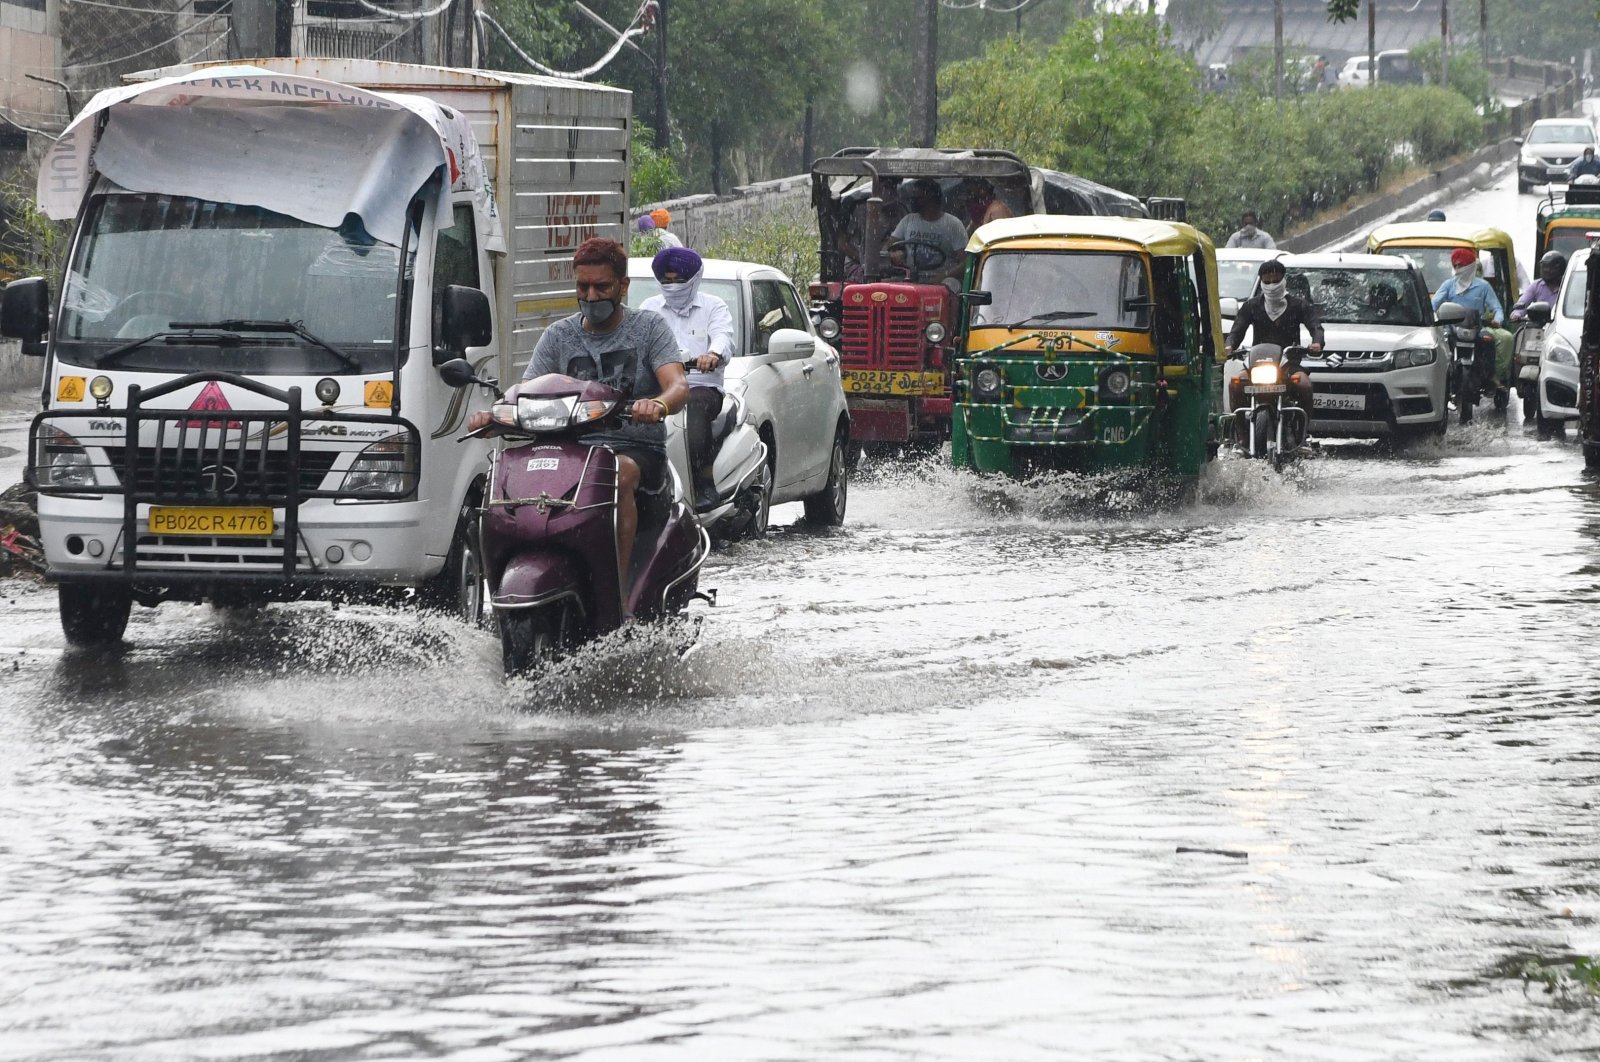 Commuters make their way through a water-logged street after heavy rainfall in Amritsar, Punjab, India, June 2, 2020. (AFP Photo)